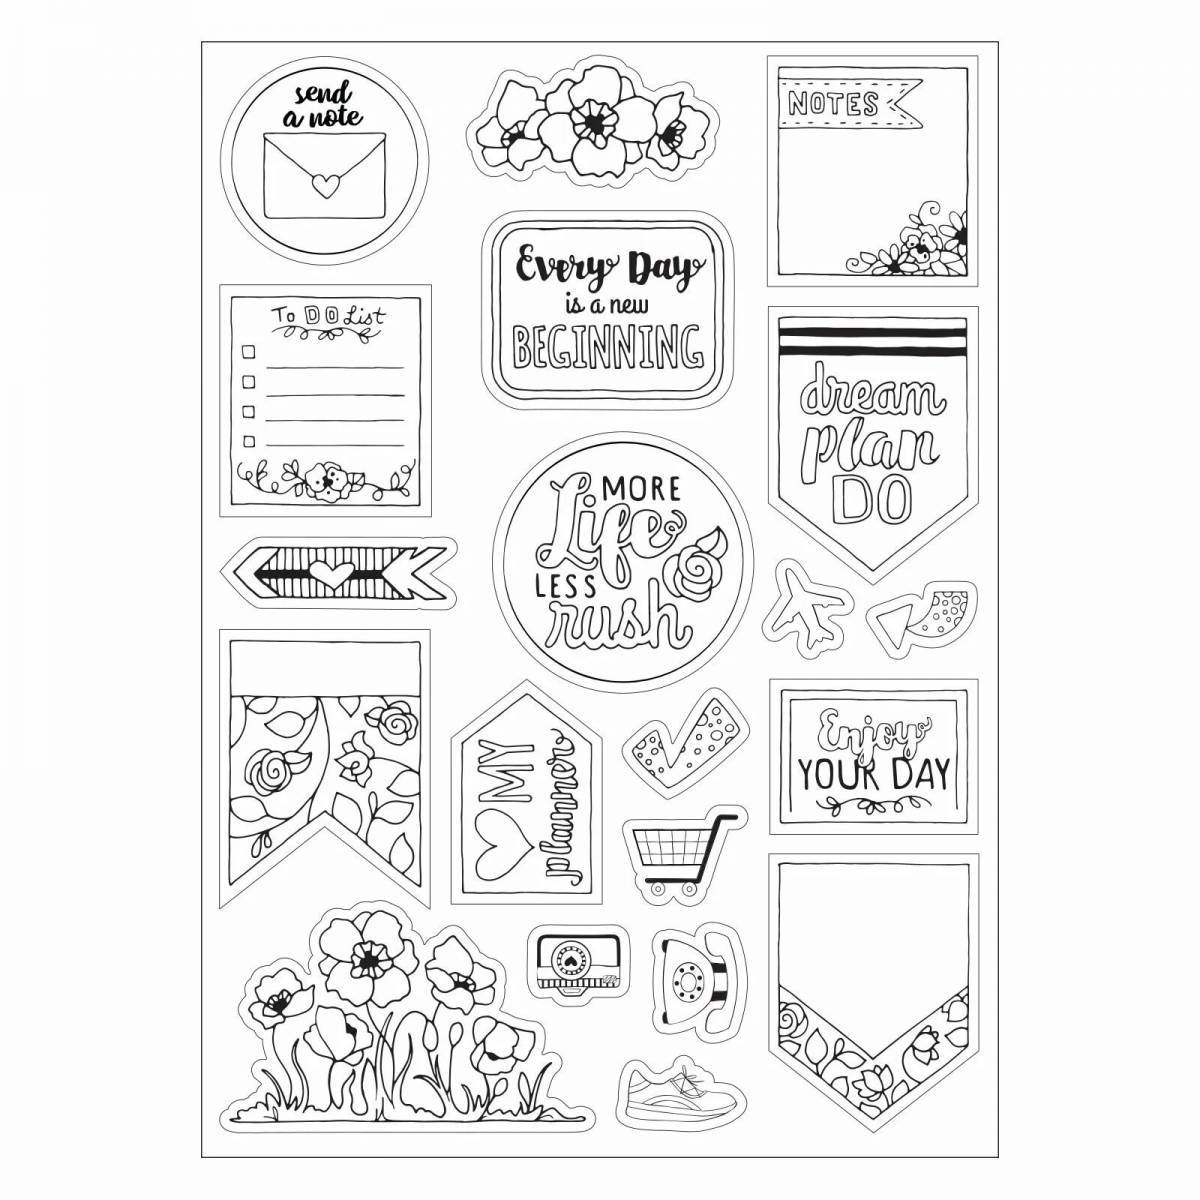 Coloring pages with small stickers